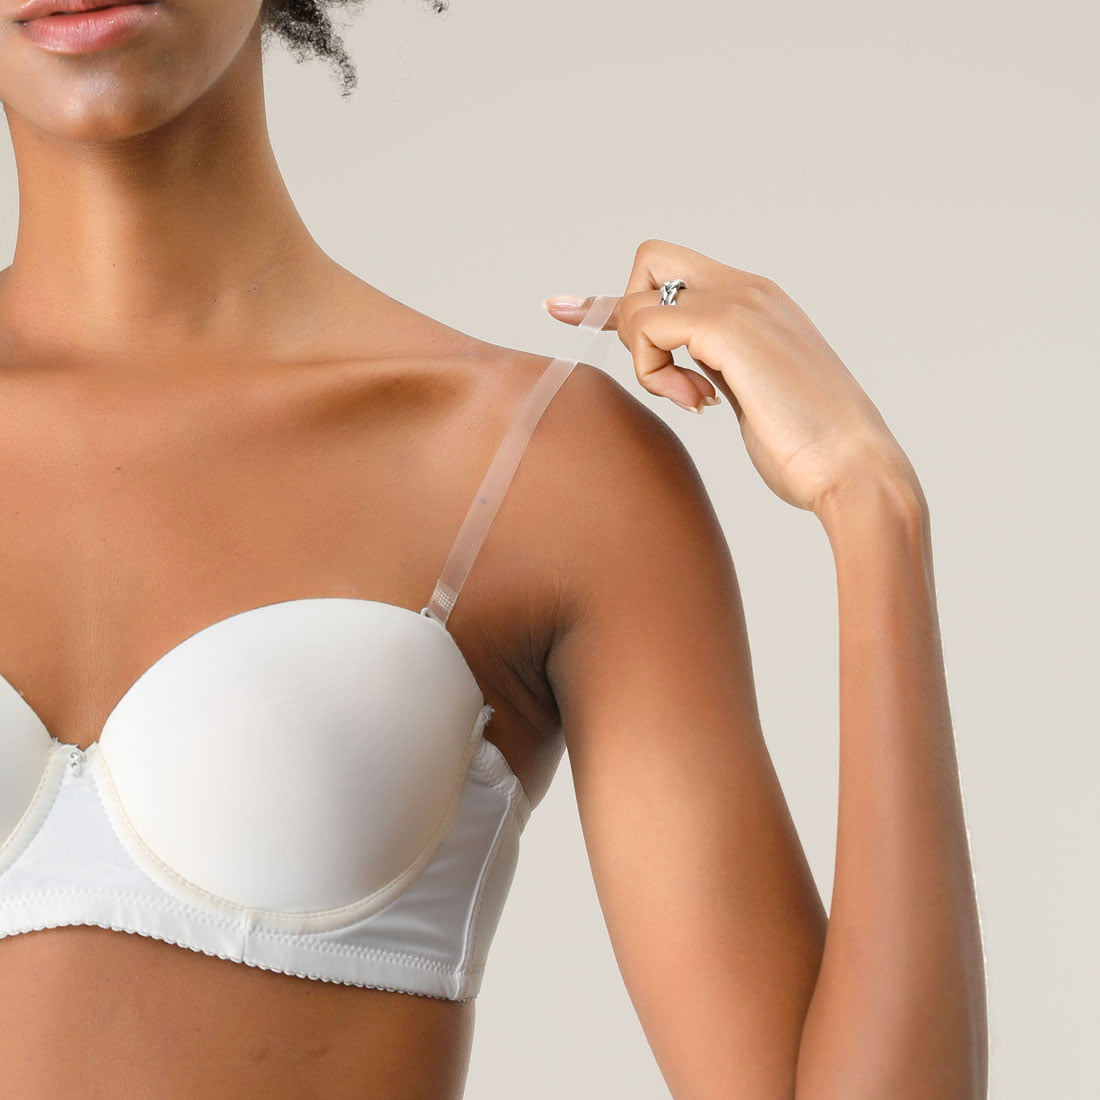 Tightening bra straps is every - The Medical City Clark